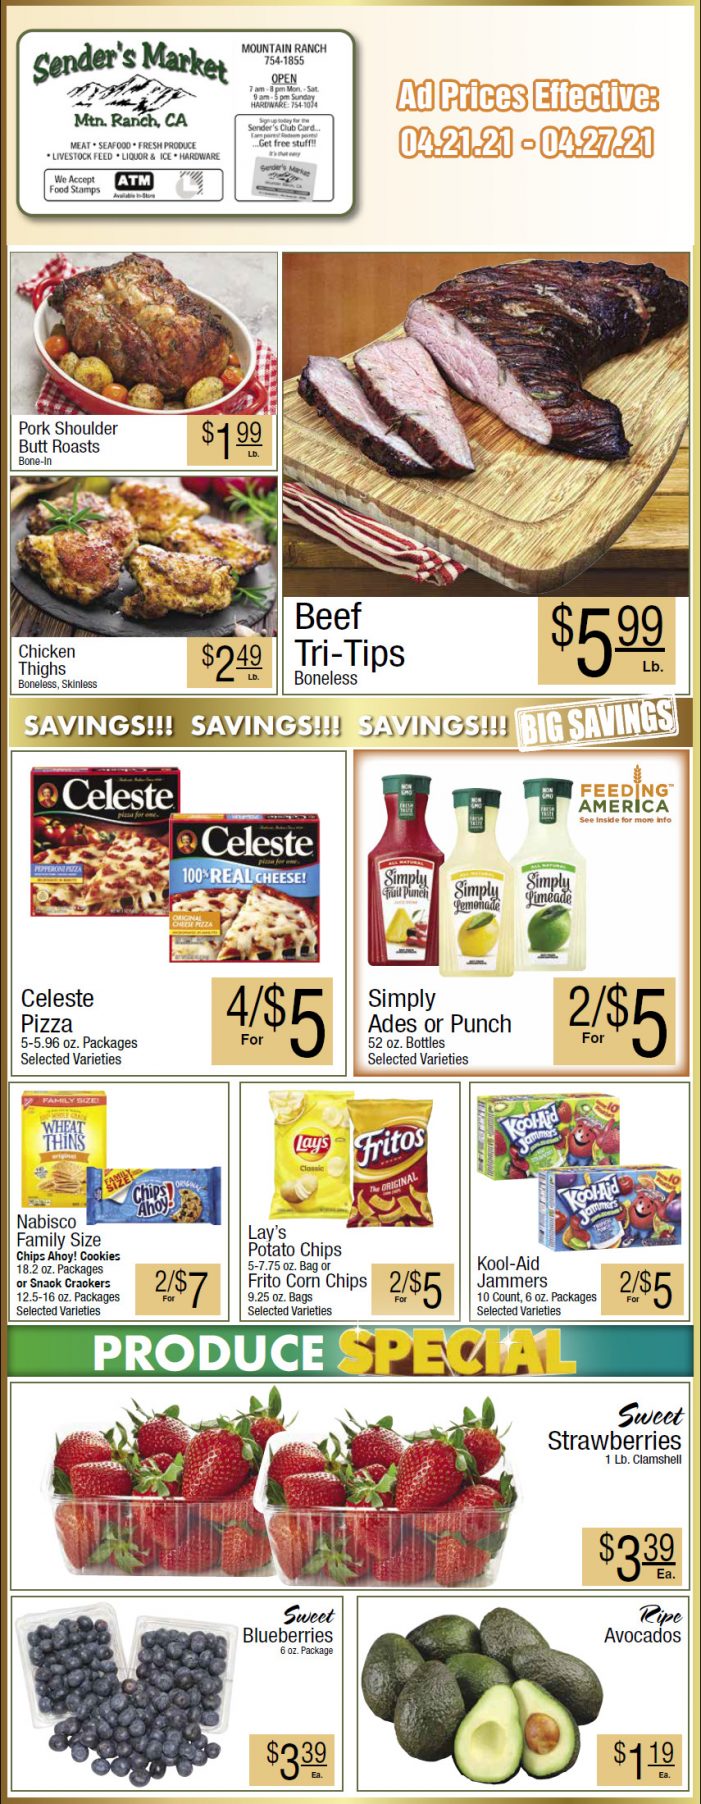 Sender’s Market’s Weekly Ad & Grocery Specials Through April 27th.  Shop Local & Save!